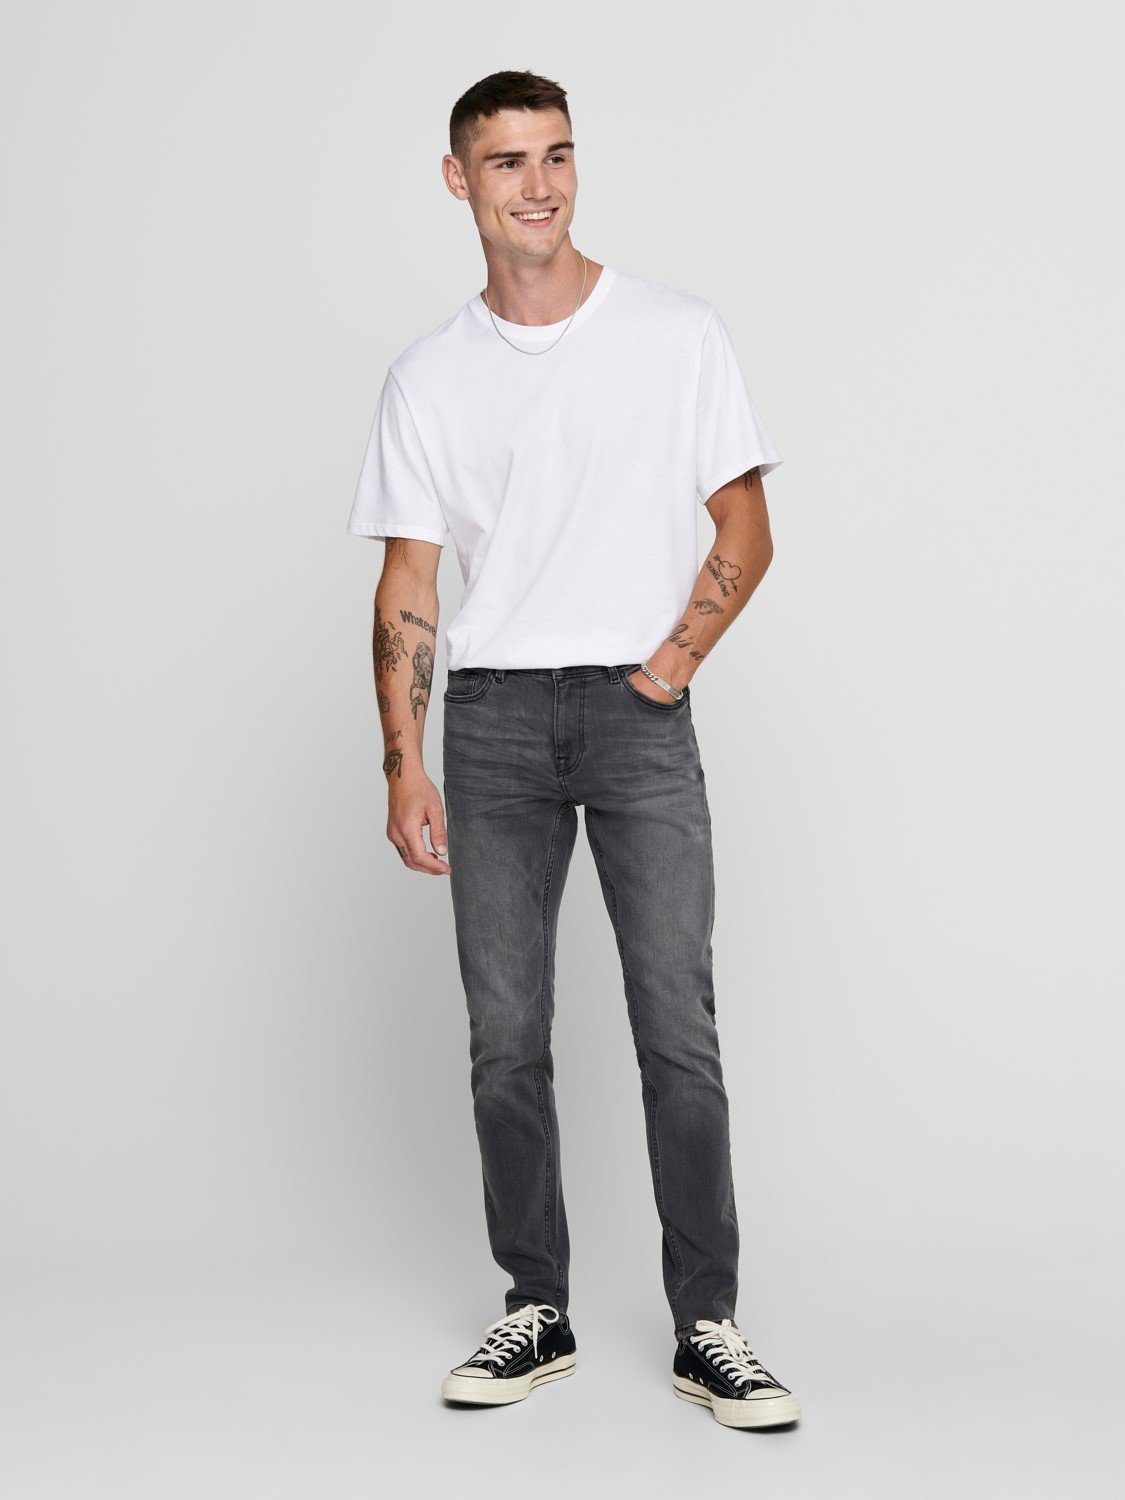 ONSWARP & Stoned Denim in Pants Jeans Skinny Basic (1-tlg) ONLY Fit Hose Grau 3977 SONS Slim-fit-Jeans Washed